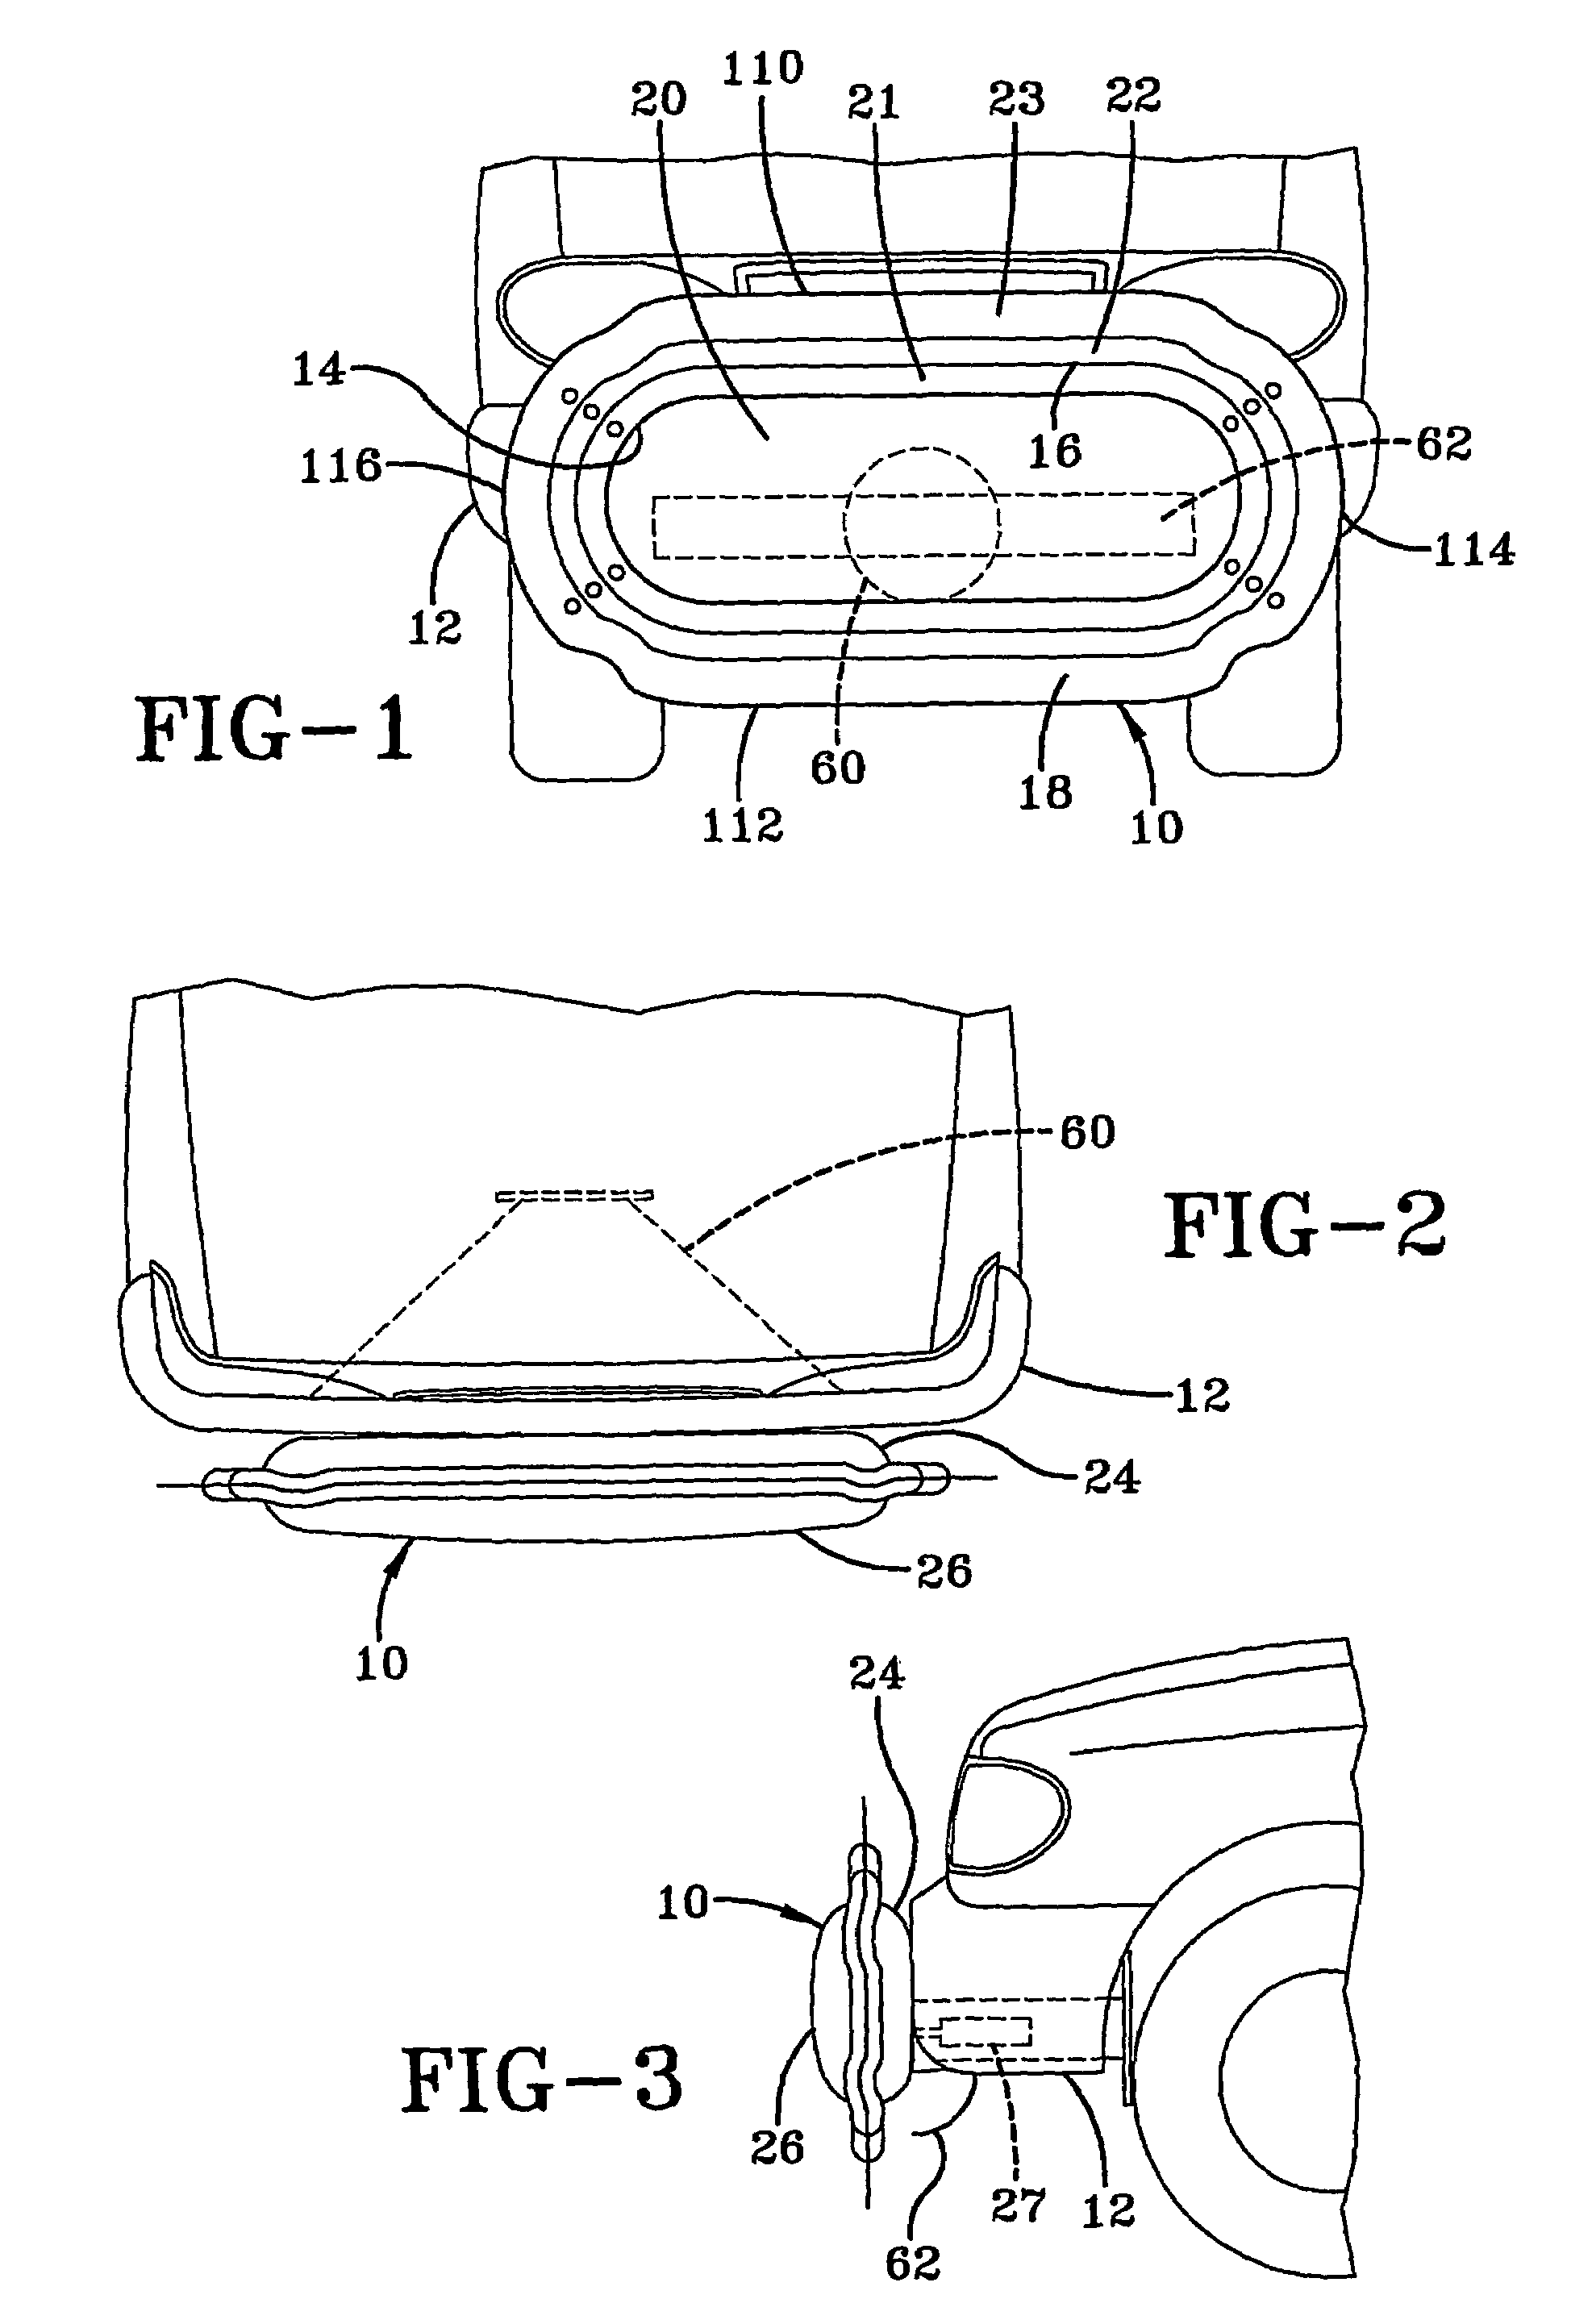 Bumper airbag with multiple chambers